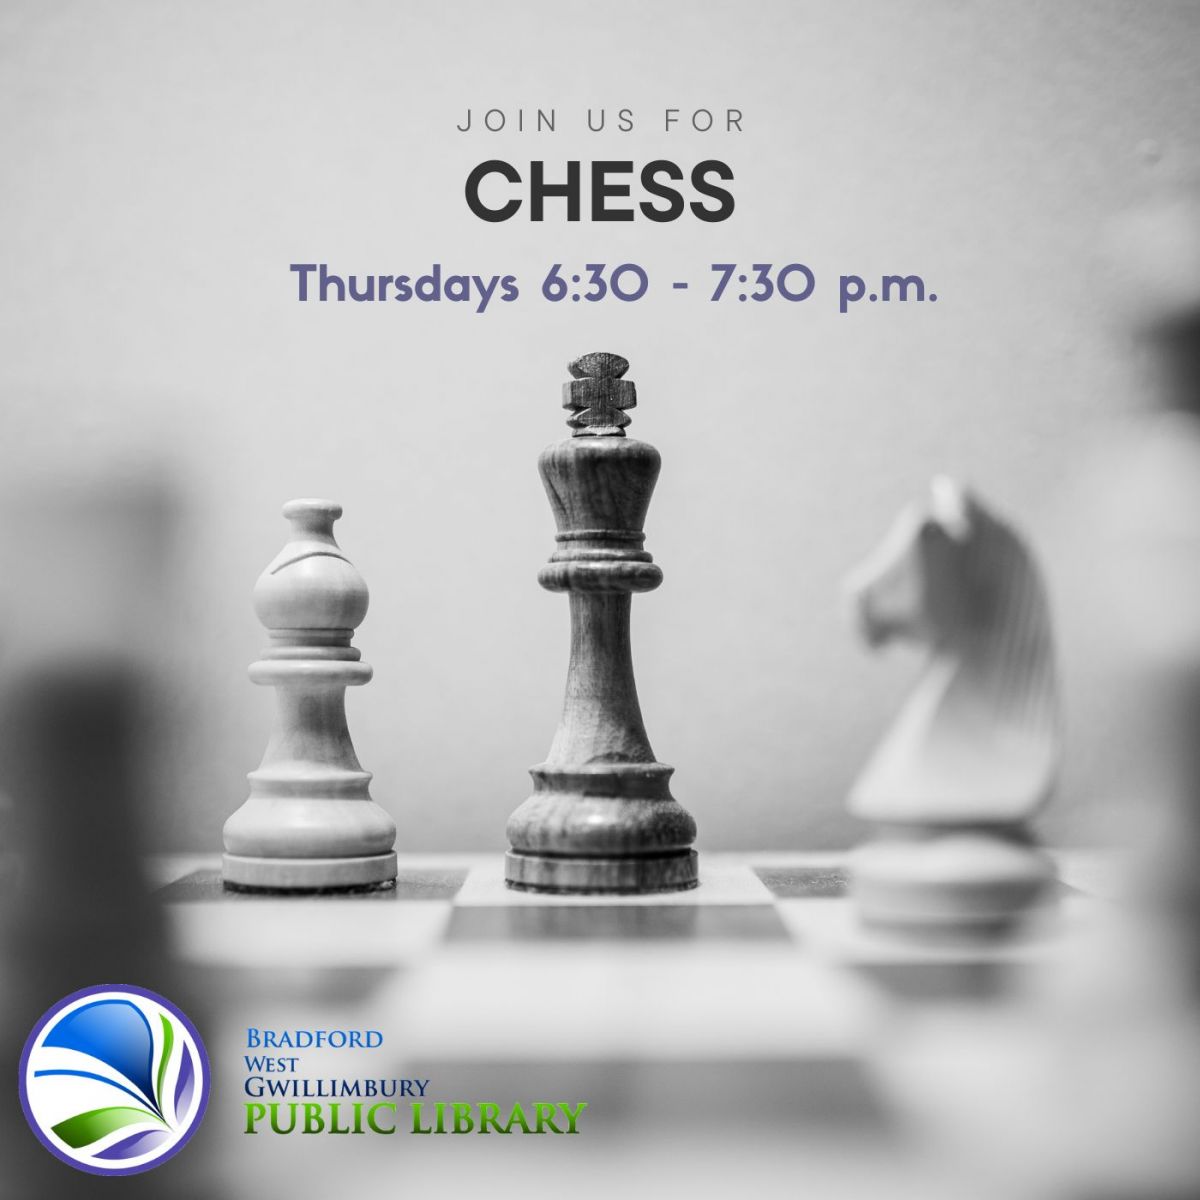 Chess pieces on a chess board. Chess, Thursdays 6:30-7:30 p.m.